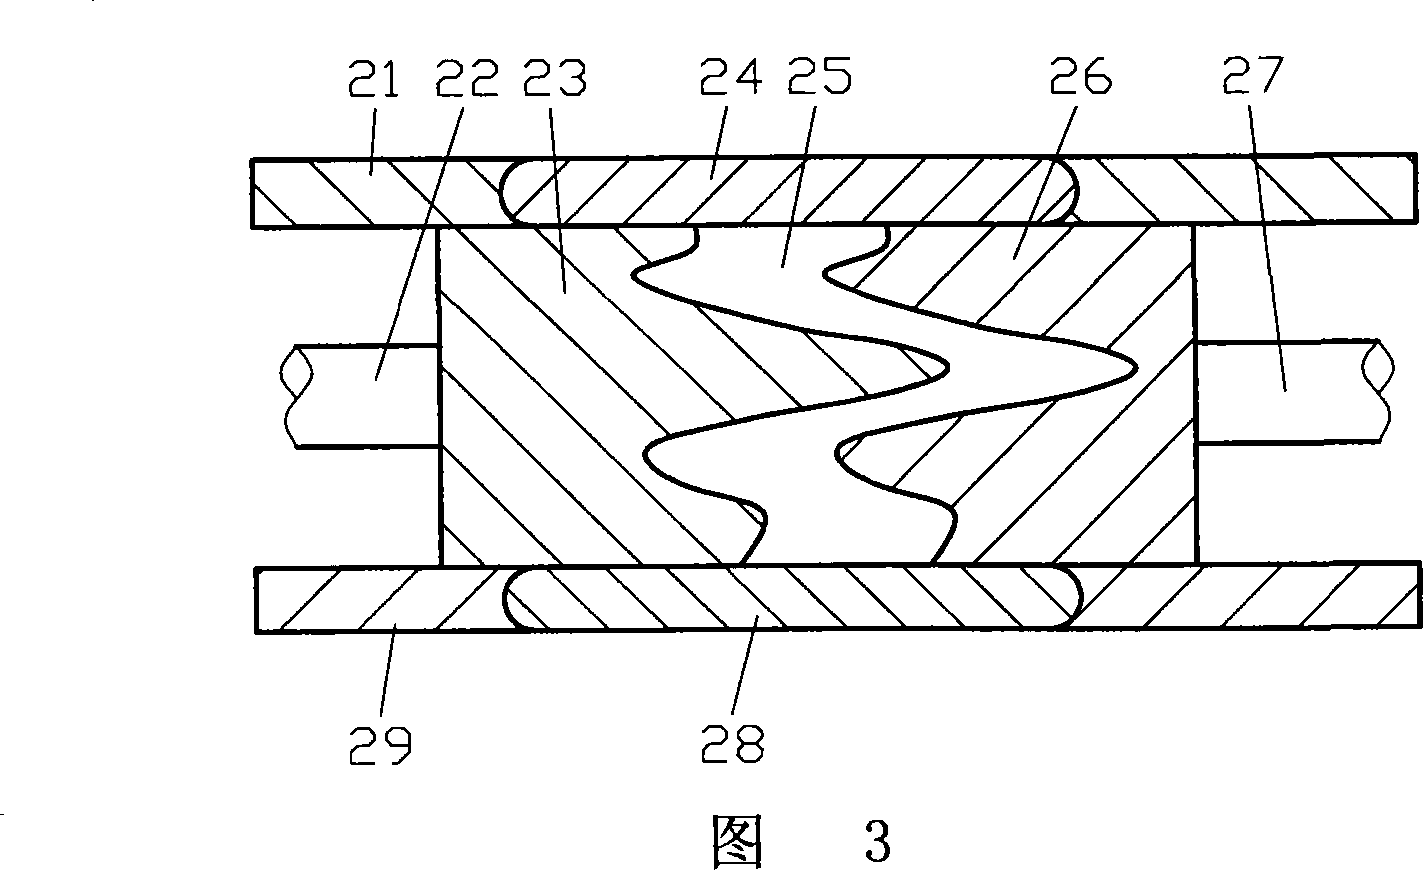 Apparatus for cleaning and transporting coal-mine water sump slurry